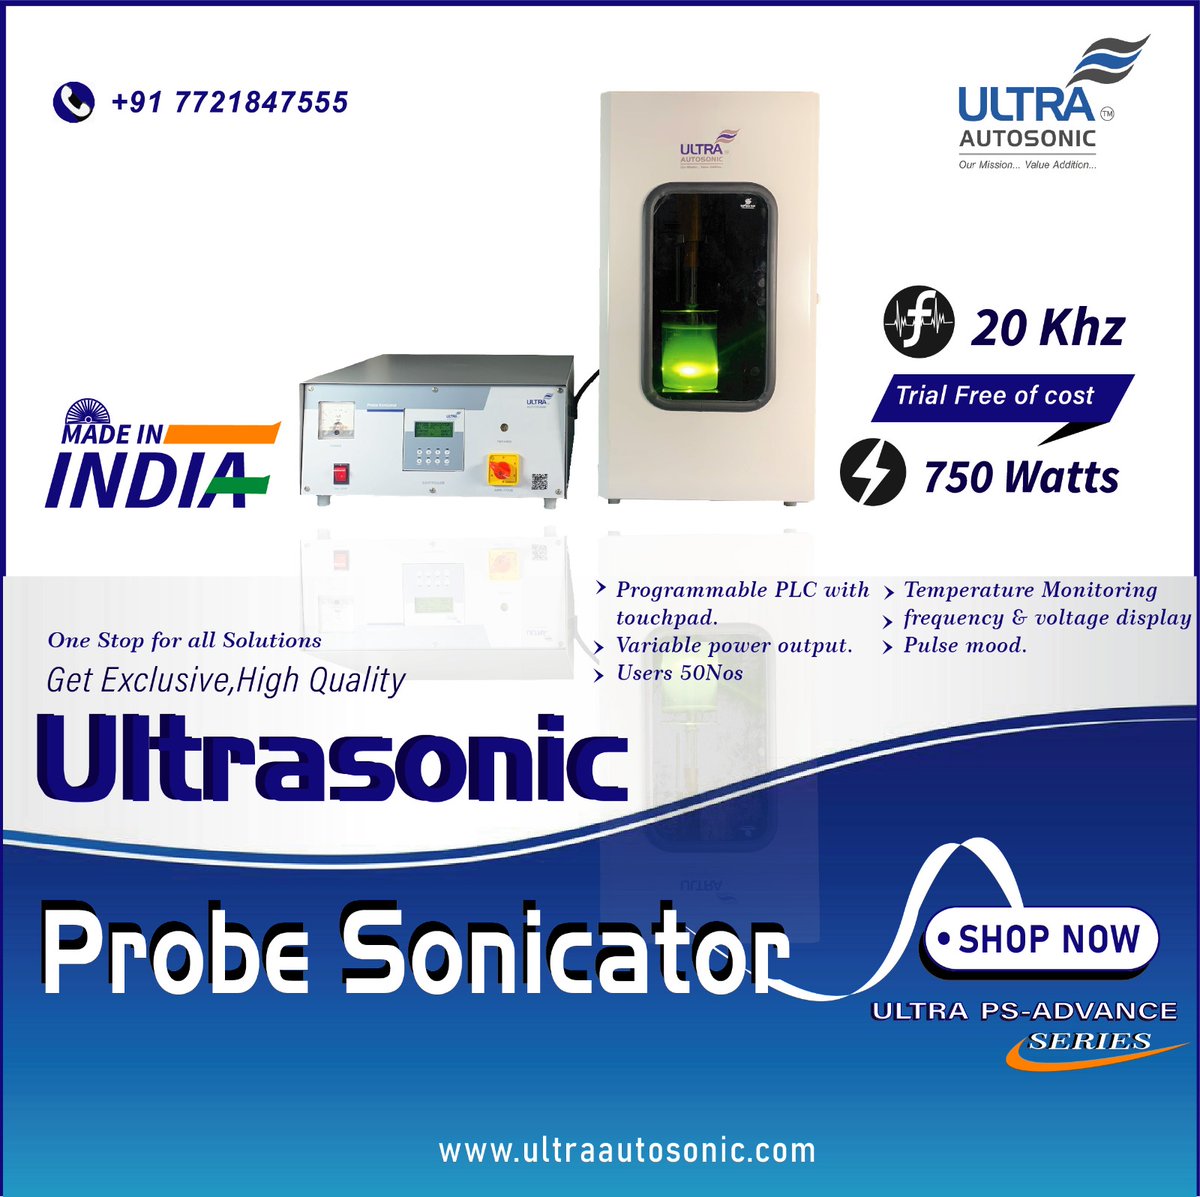 📷 Unleash the Power of Ultrasonics with the Advance Probe Sonicator!

#UltrasonicTechnology #ResearchInnovation #LabEquipment #ScienceAdvancements